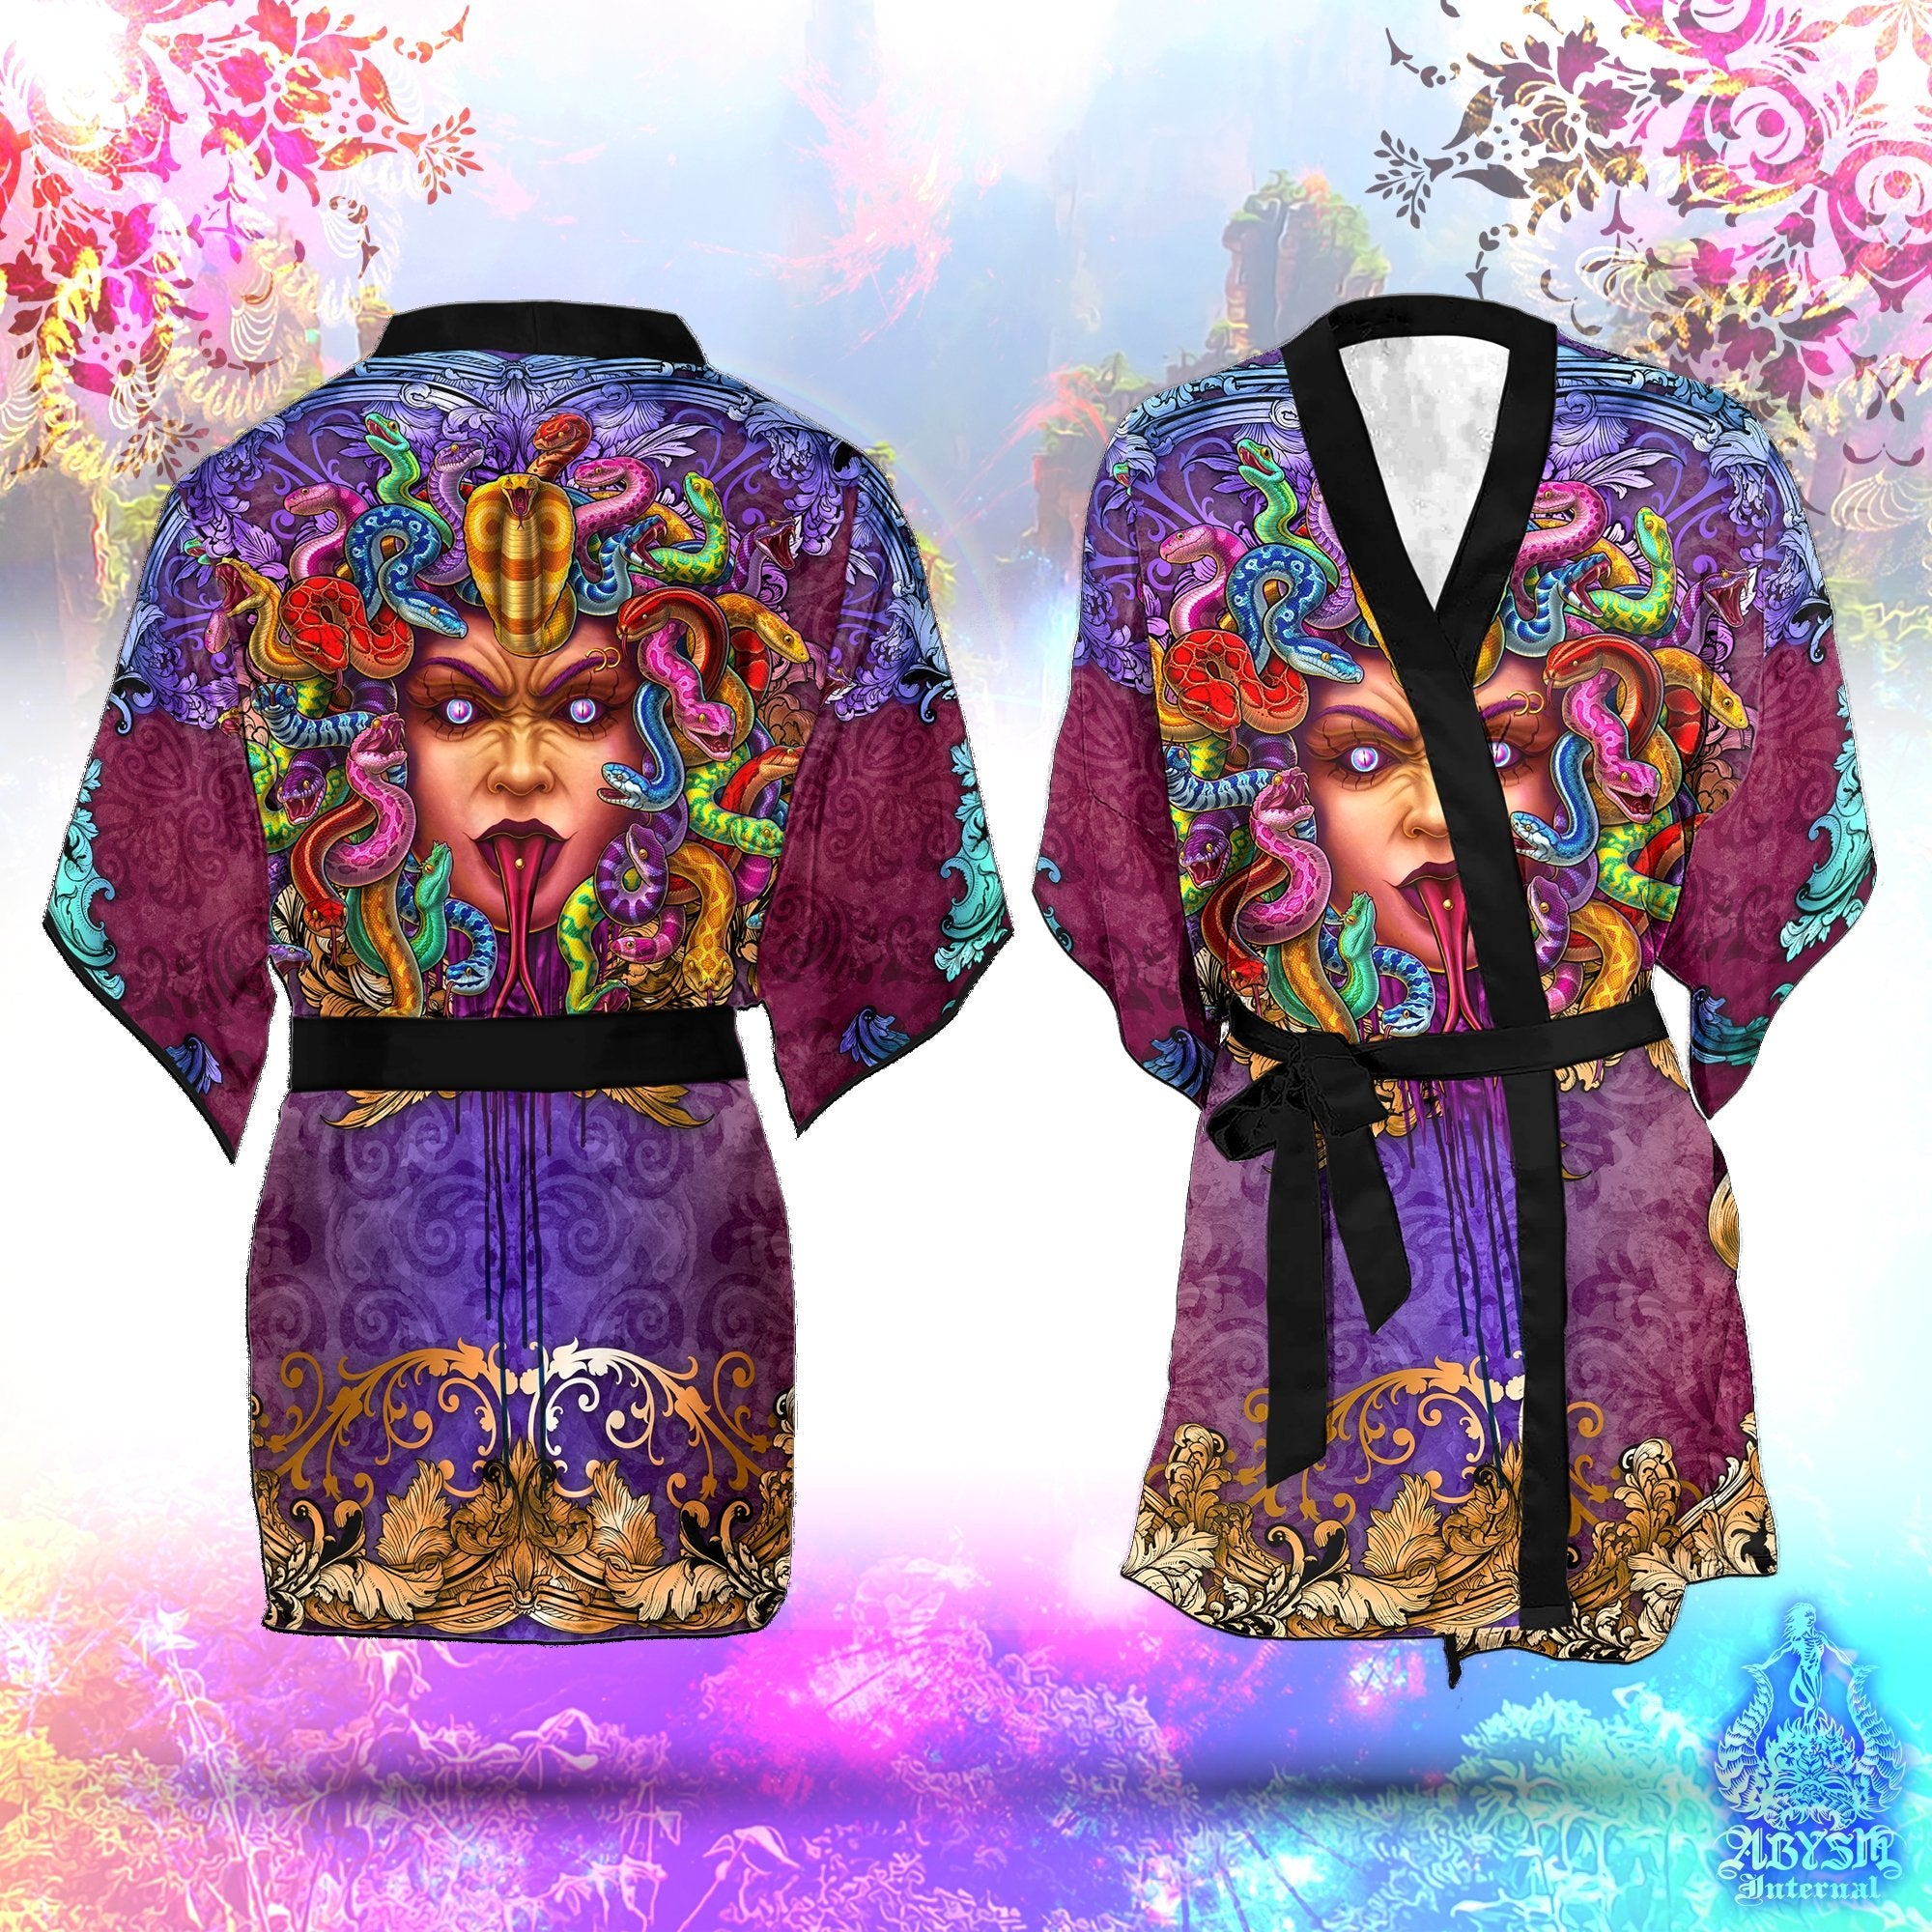 Medusa Cover Up, Beach Outfit, Party Kimono, Summer Festival Robe, Indie and Alternative Clothing, Unisex - Psy Mock - Abysm Internal